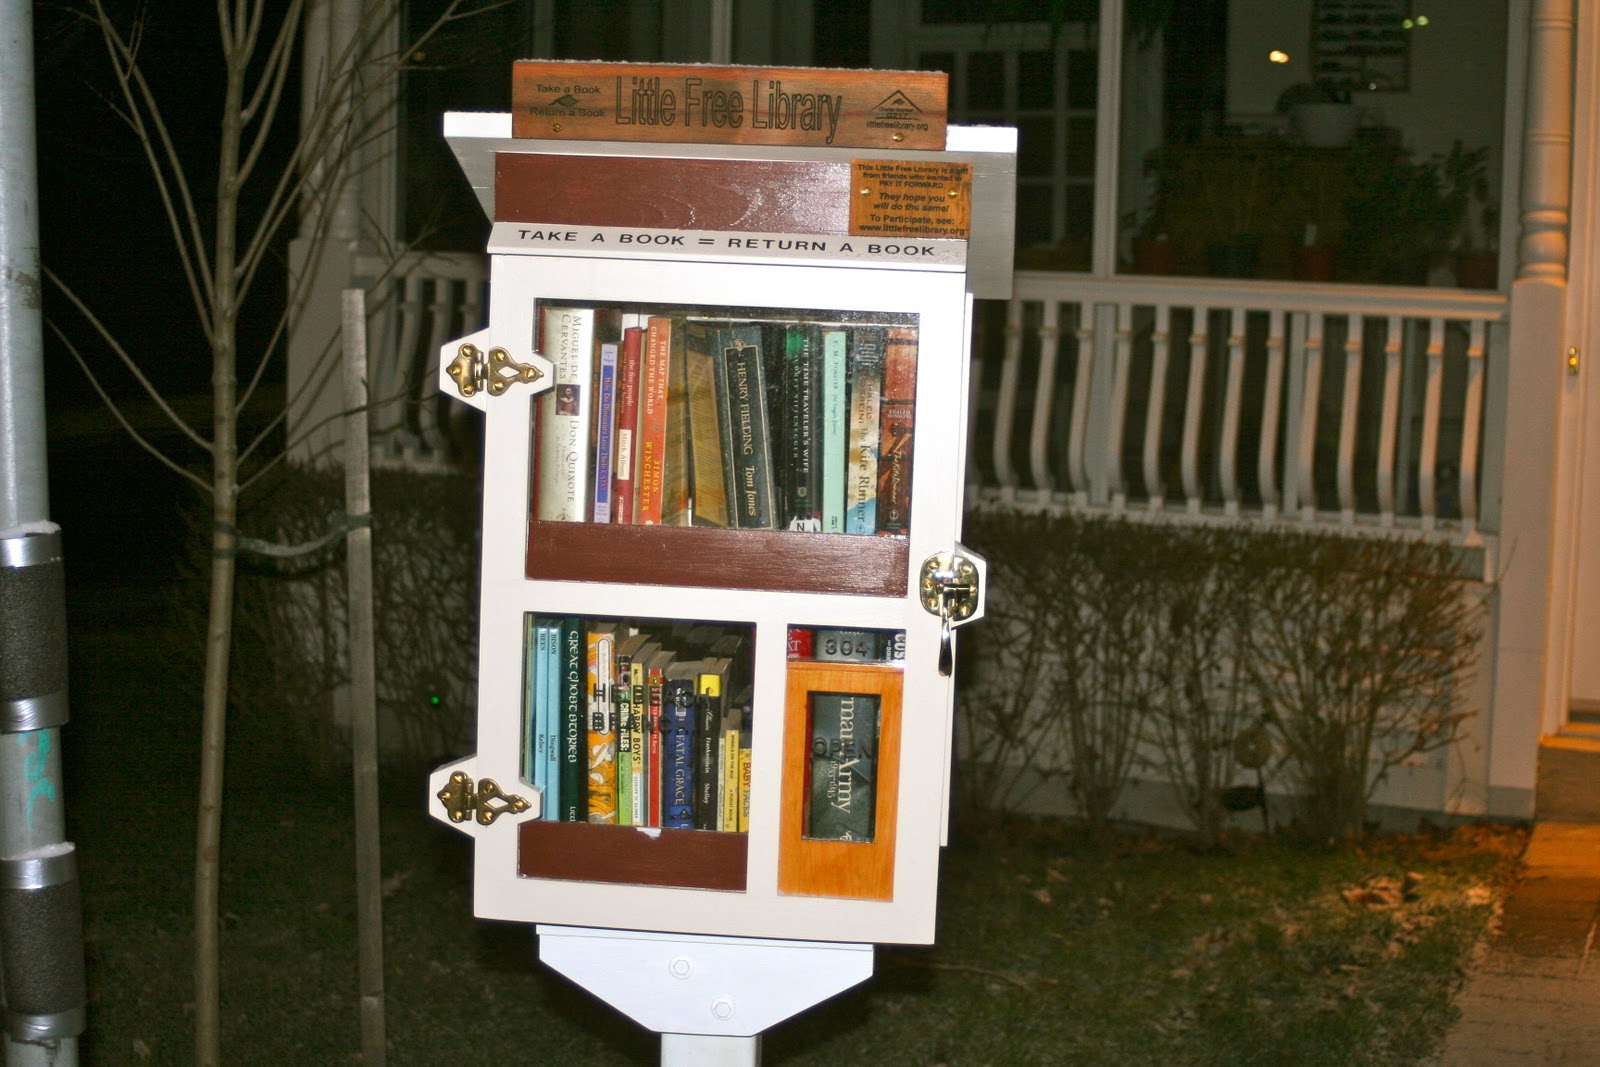 nose-in-a-book-little-free-library-toronto